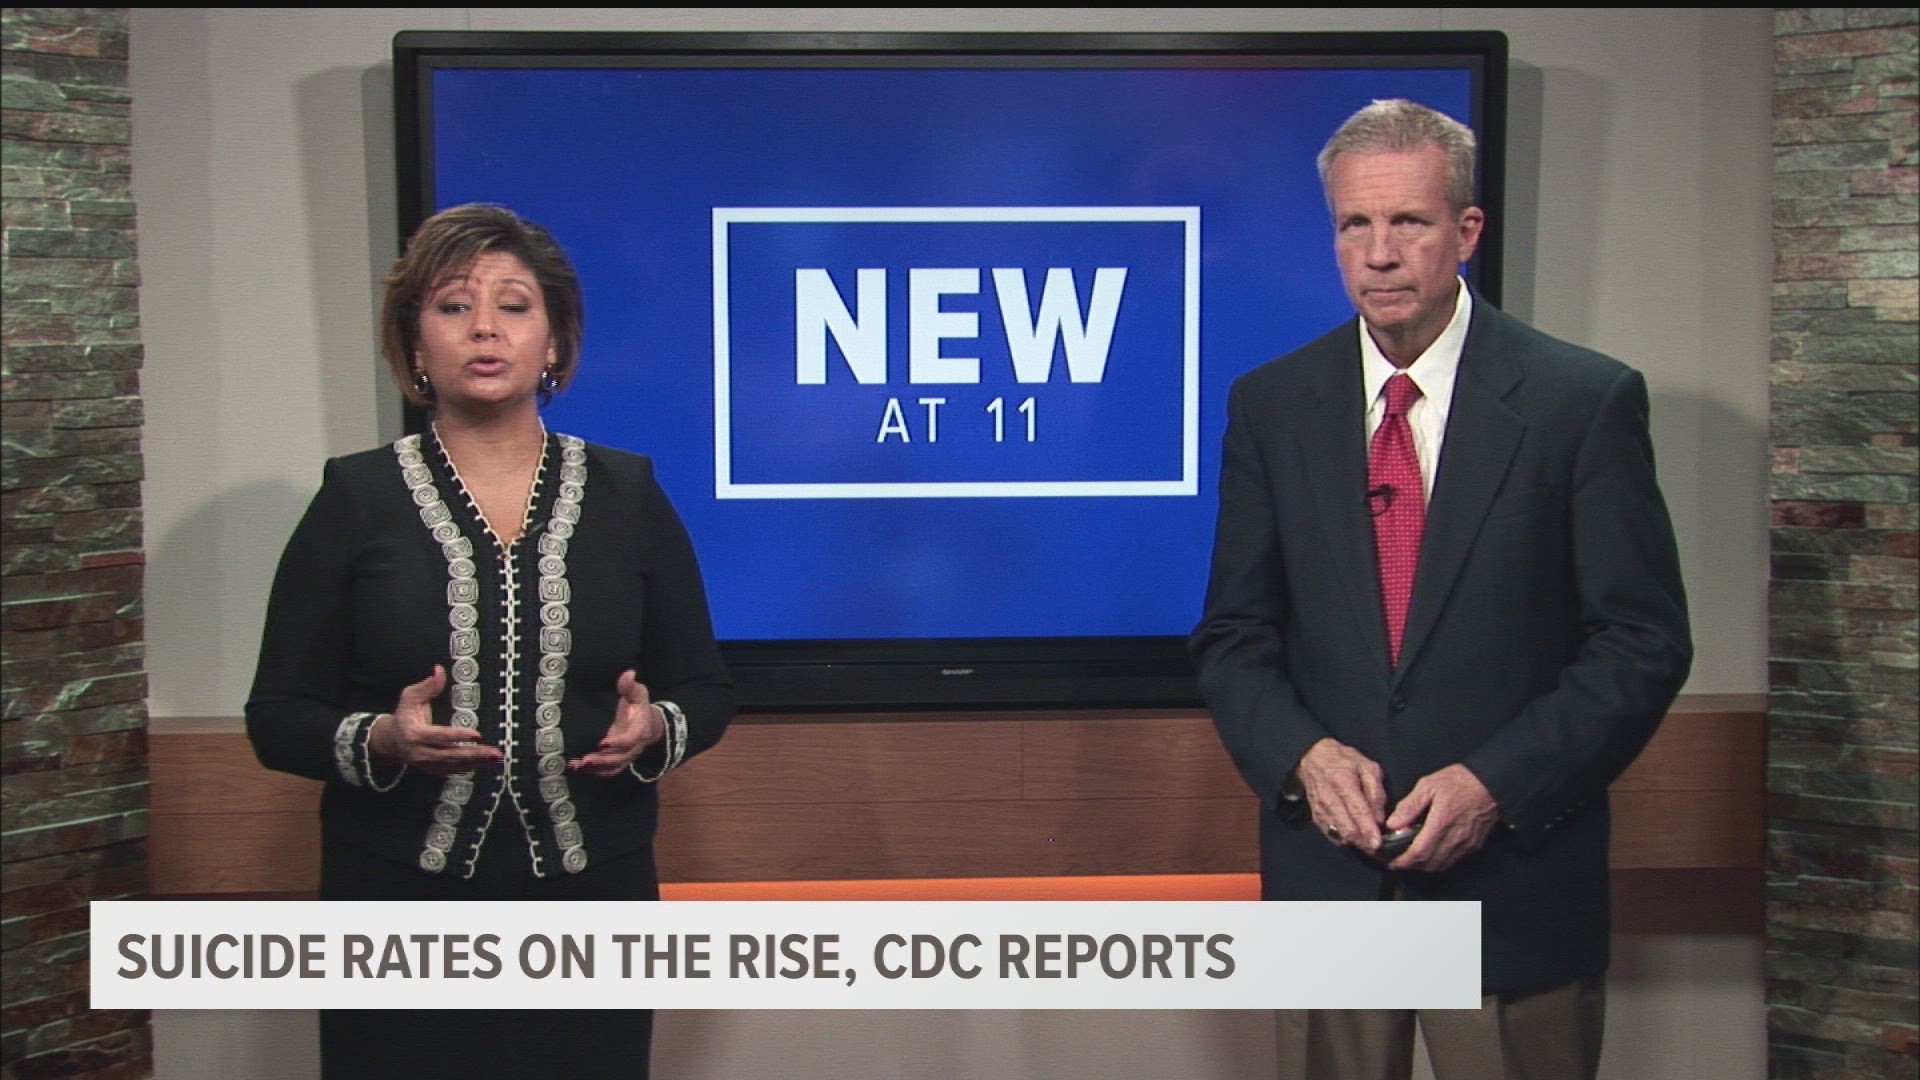 CDC: Suicide rates on the rise